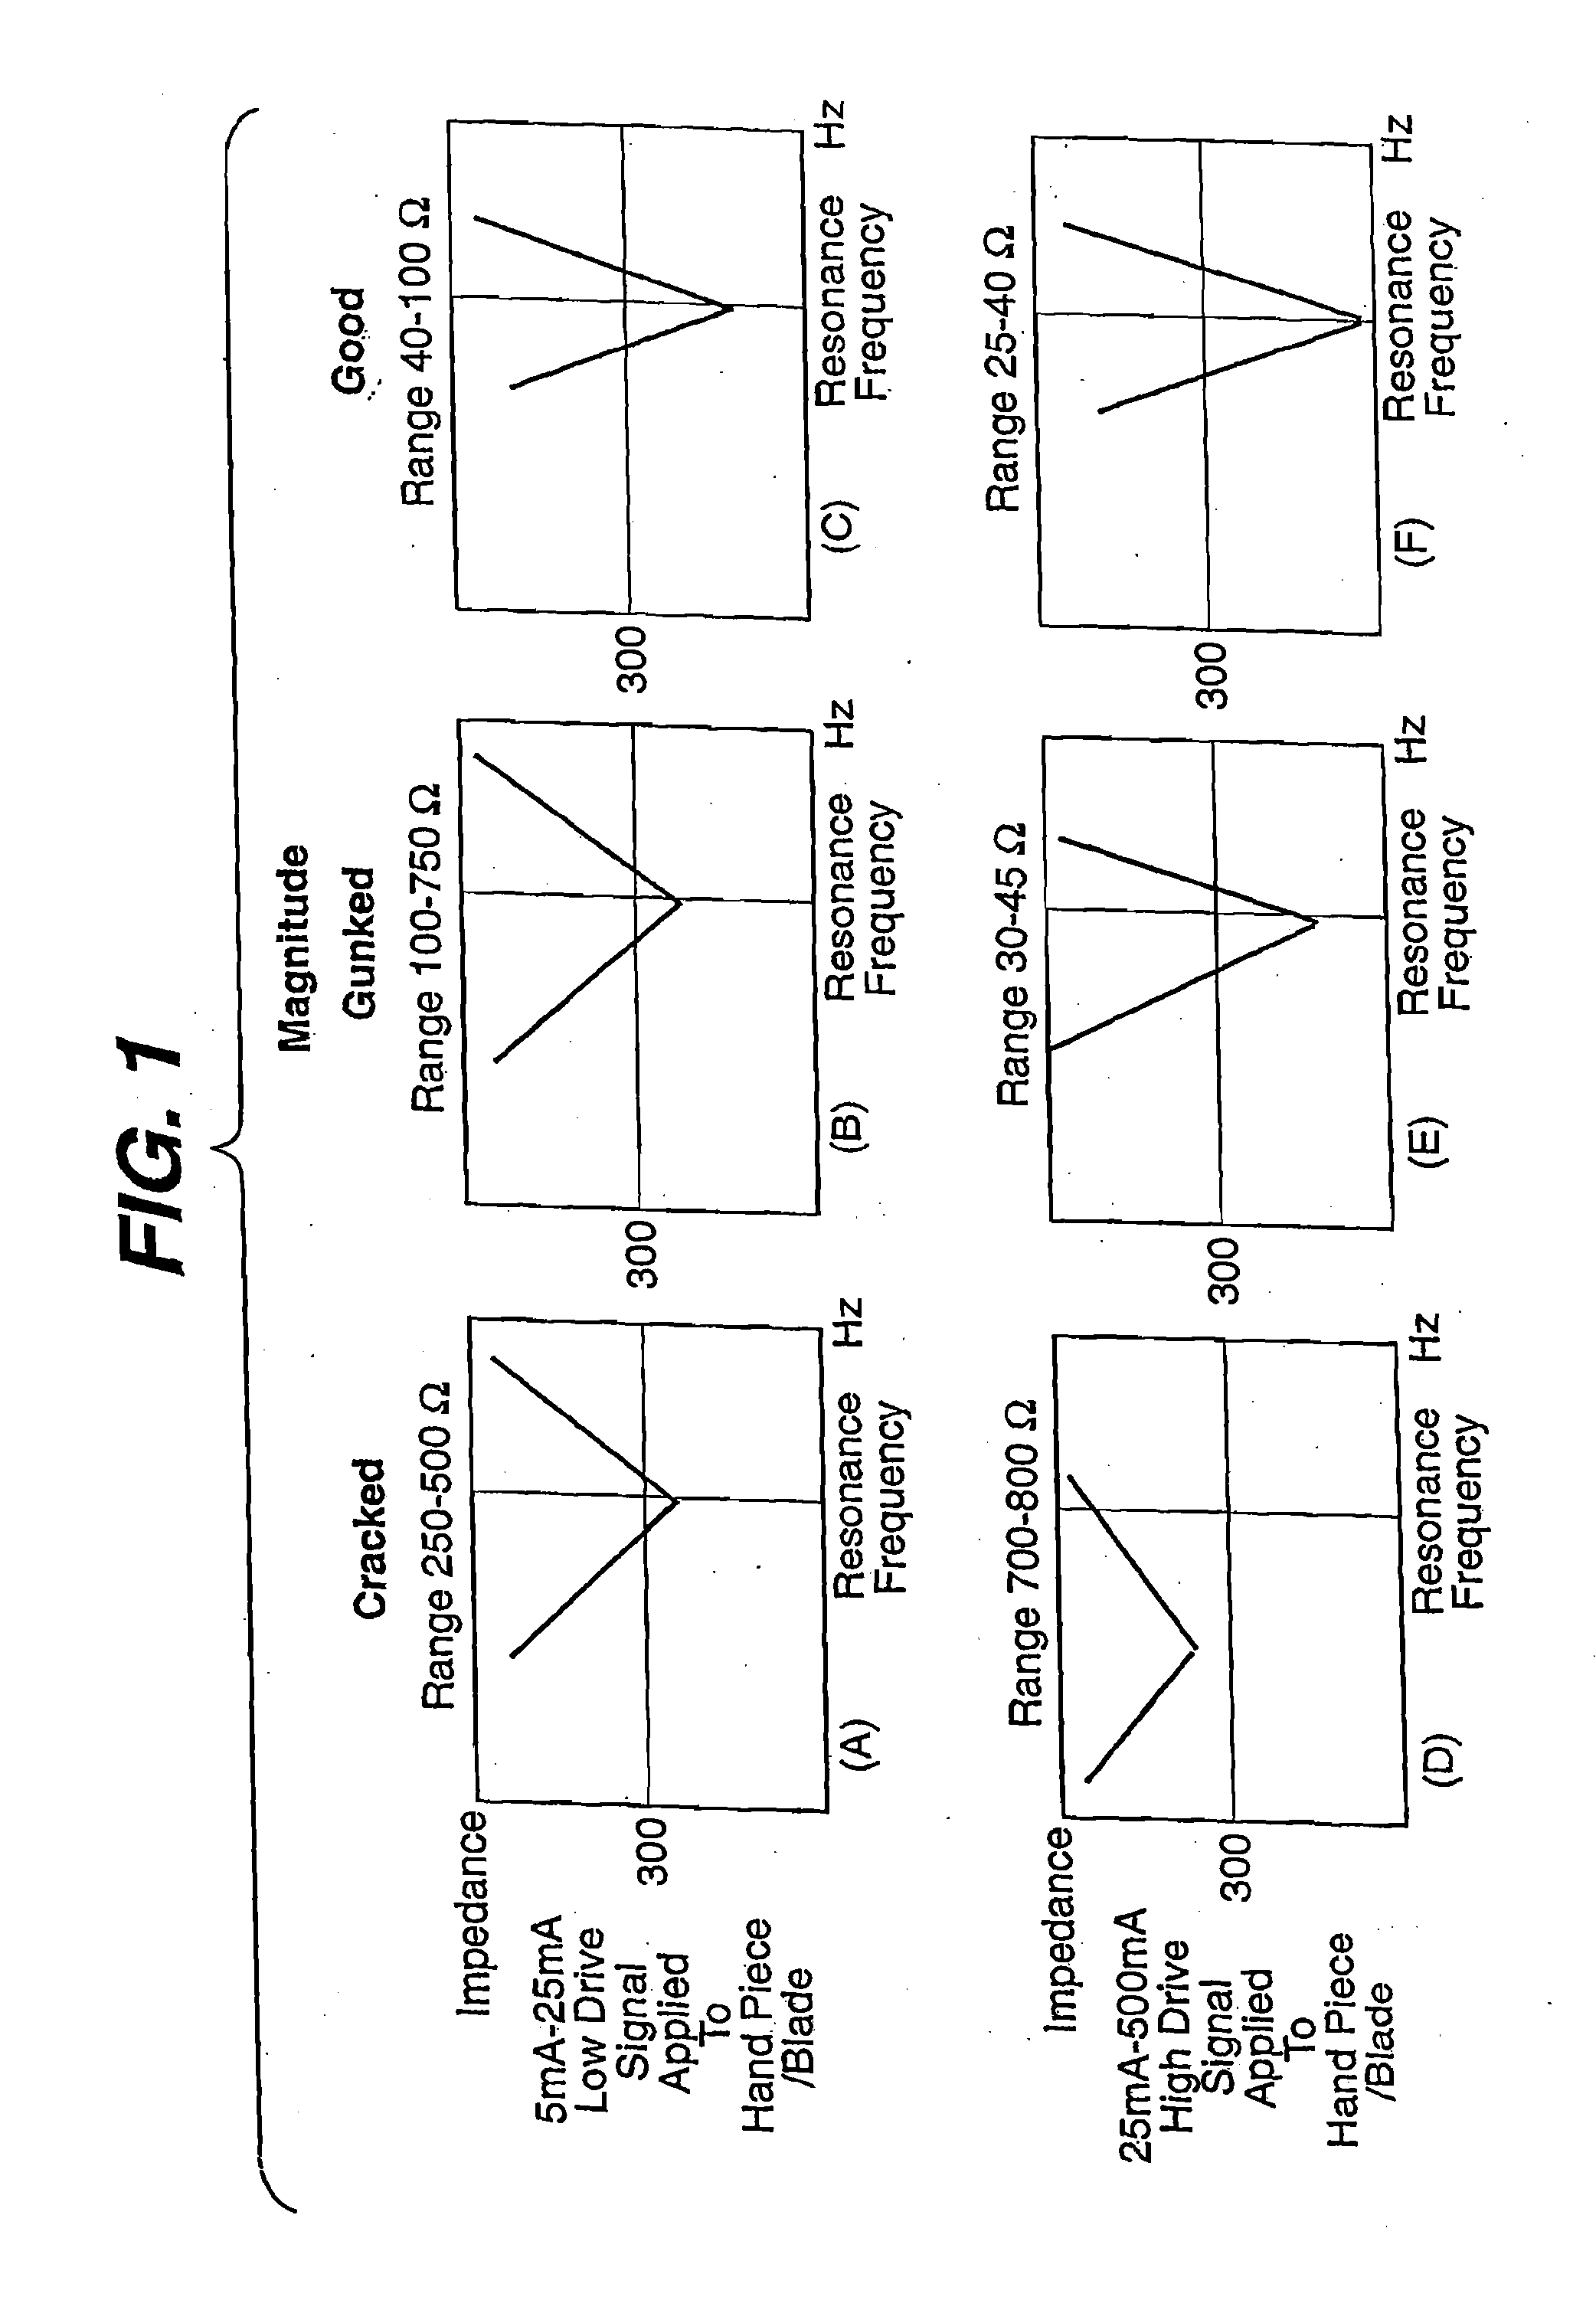 Method for differentiating between burdened and cracked ultrasonically tuned blades